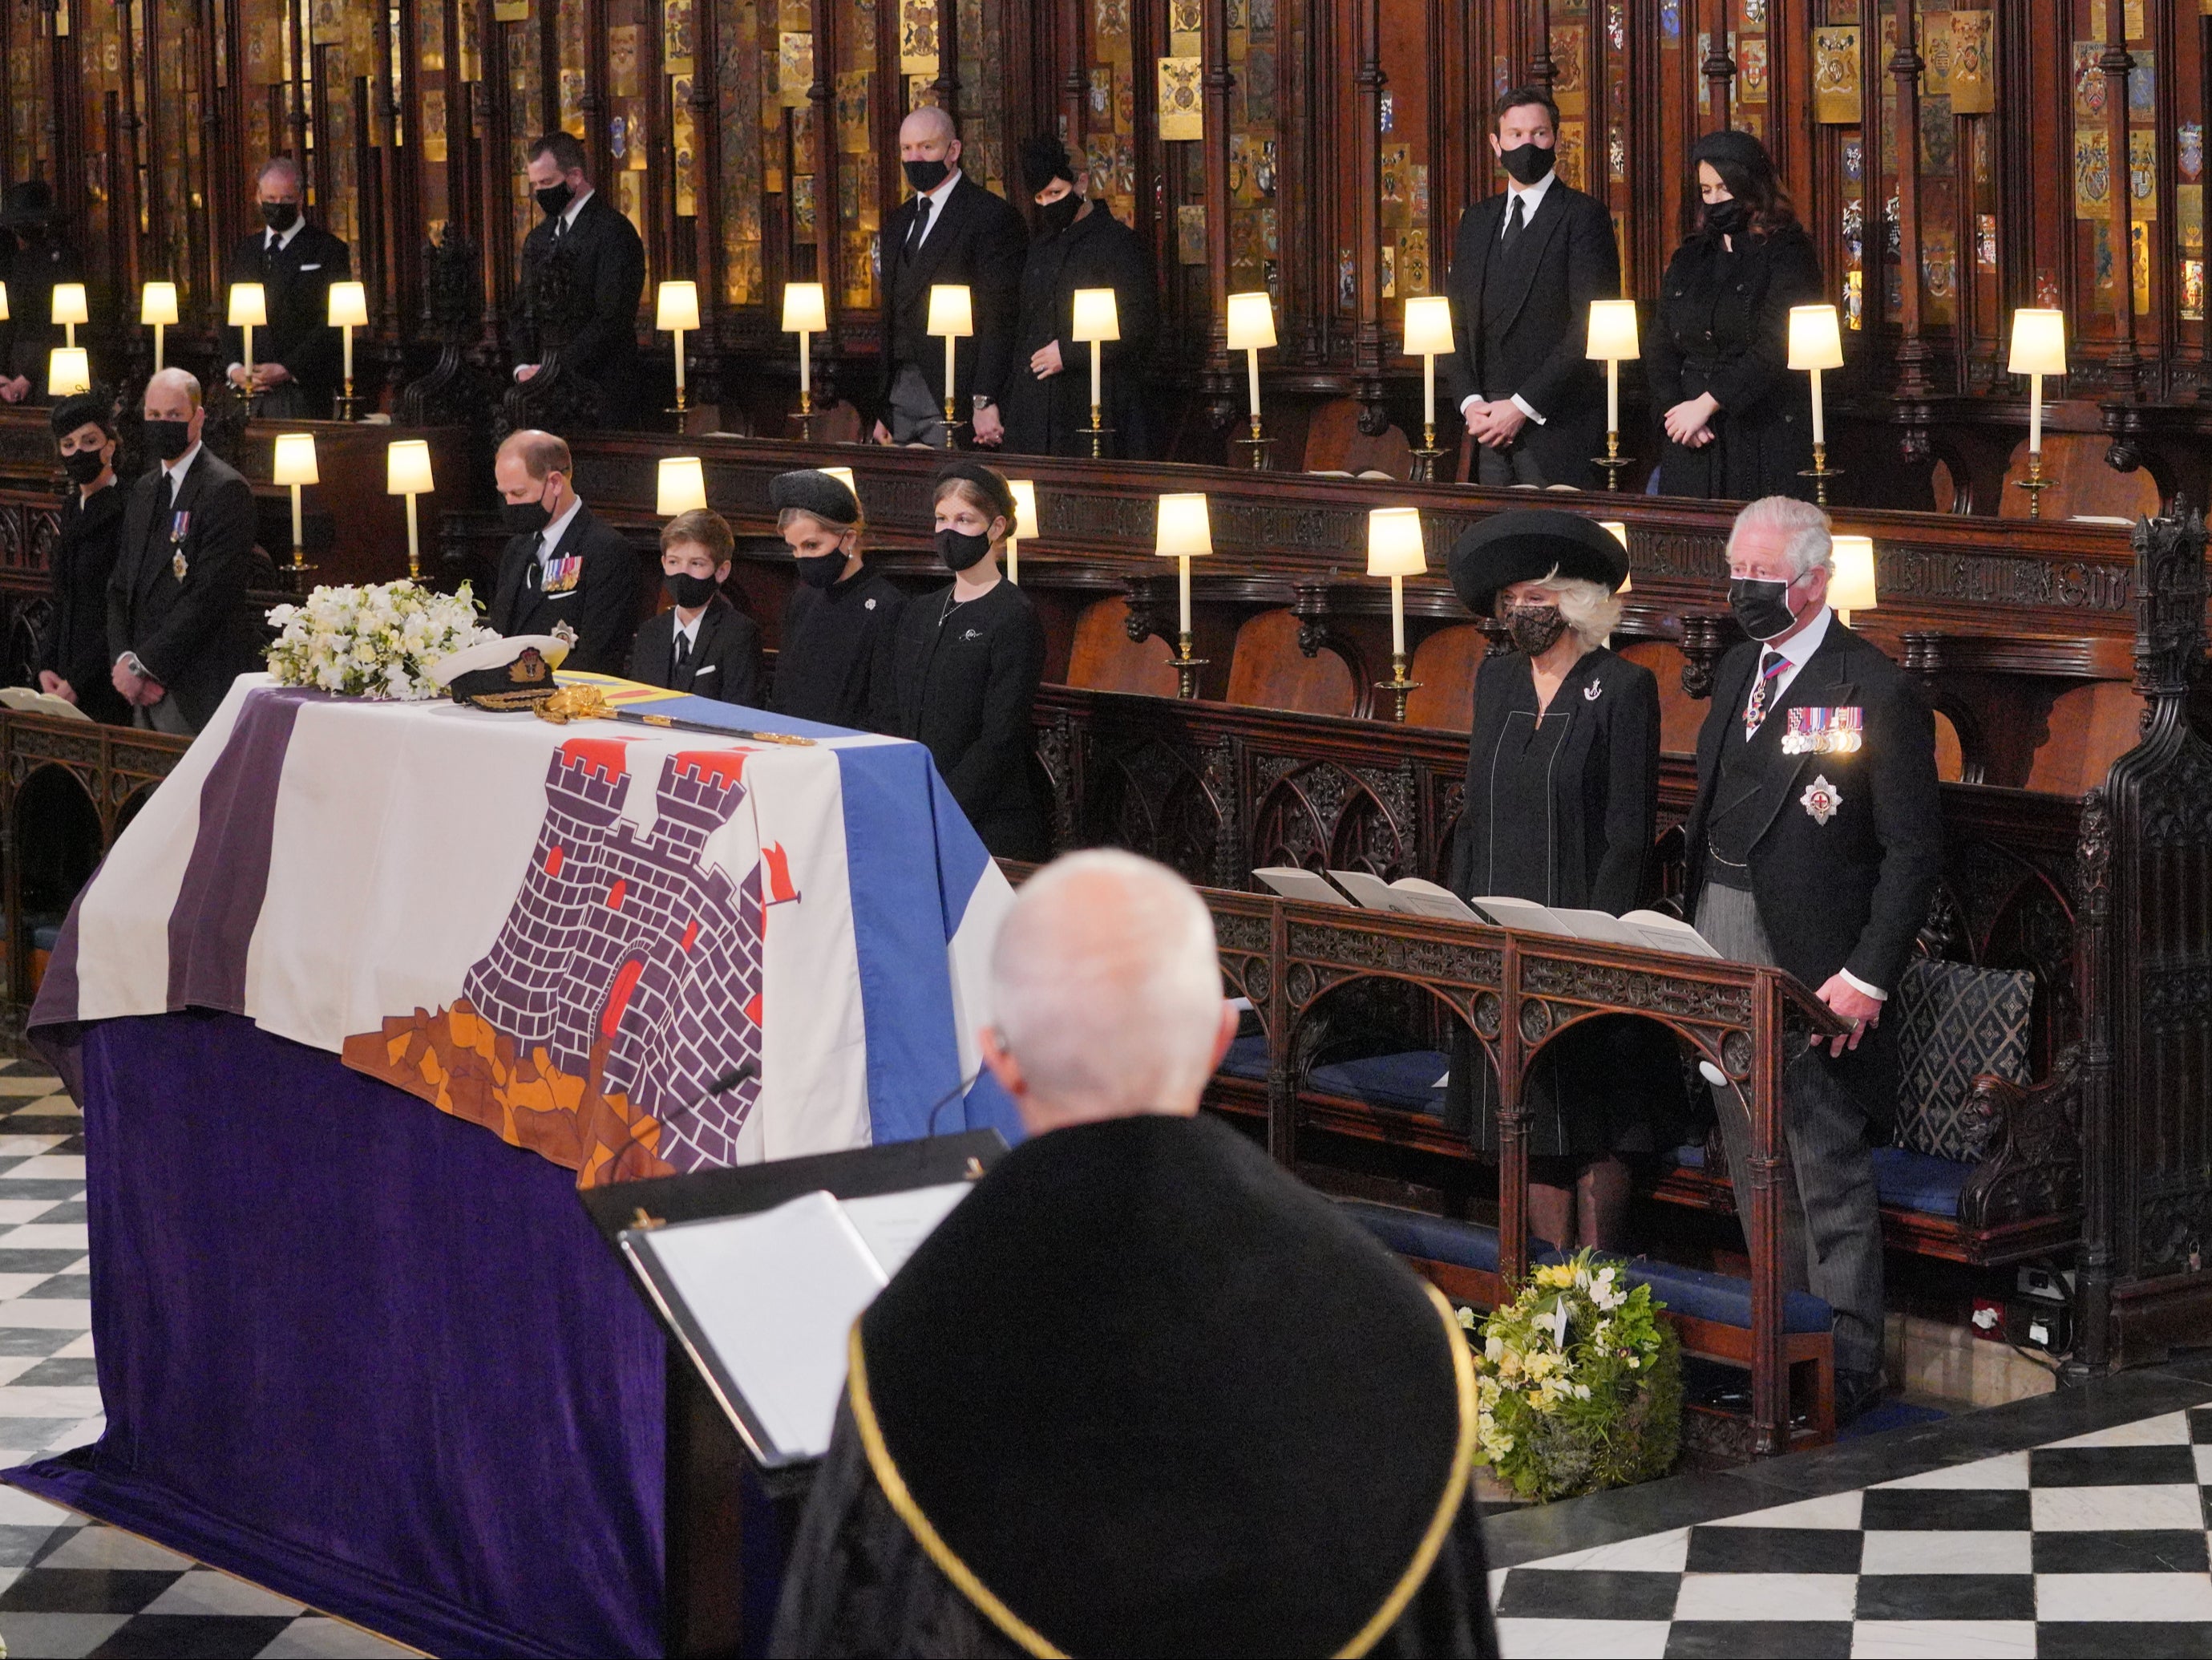 Mourners, including the Duchess and Duke of Cambridge, attend the funeral of Prince Philip at St George’s Chapel, Windsor Castle, on 17 April